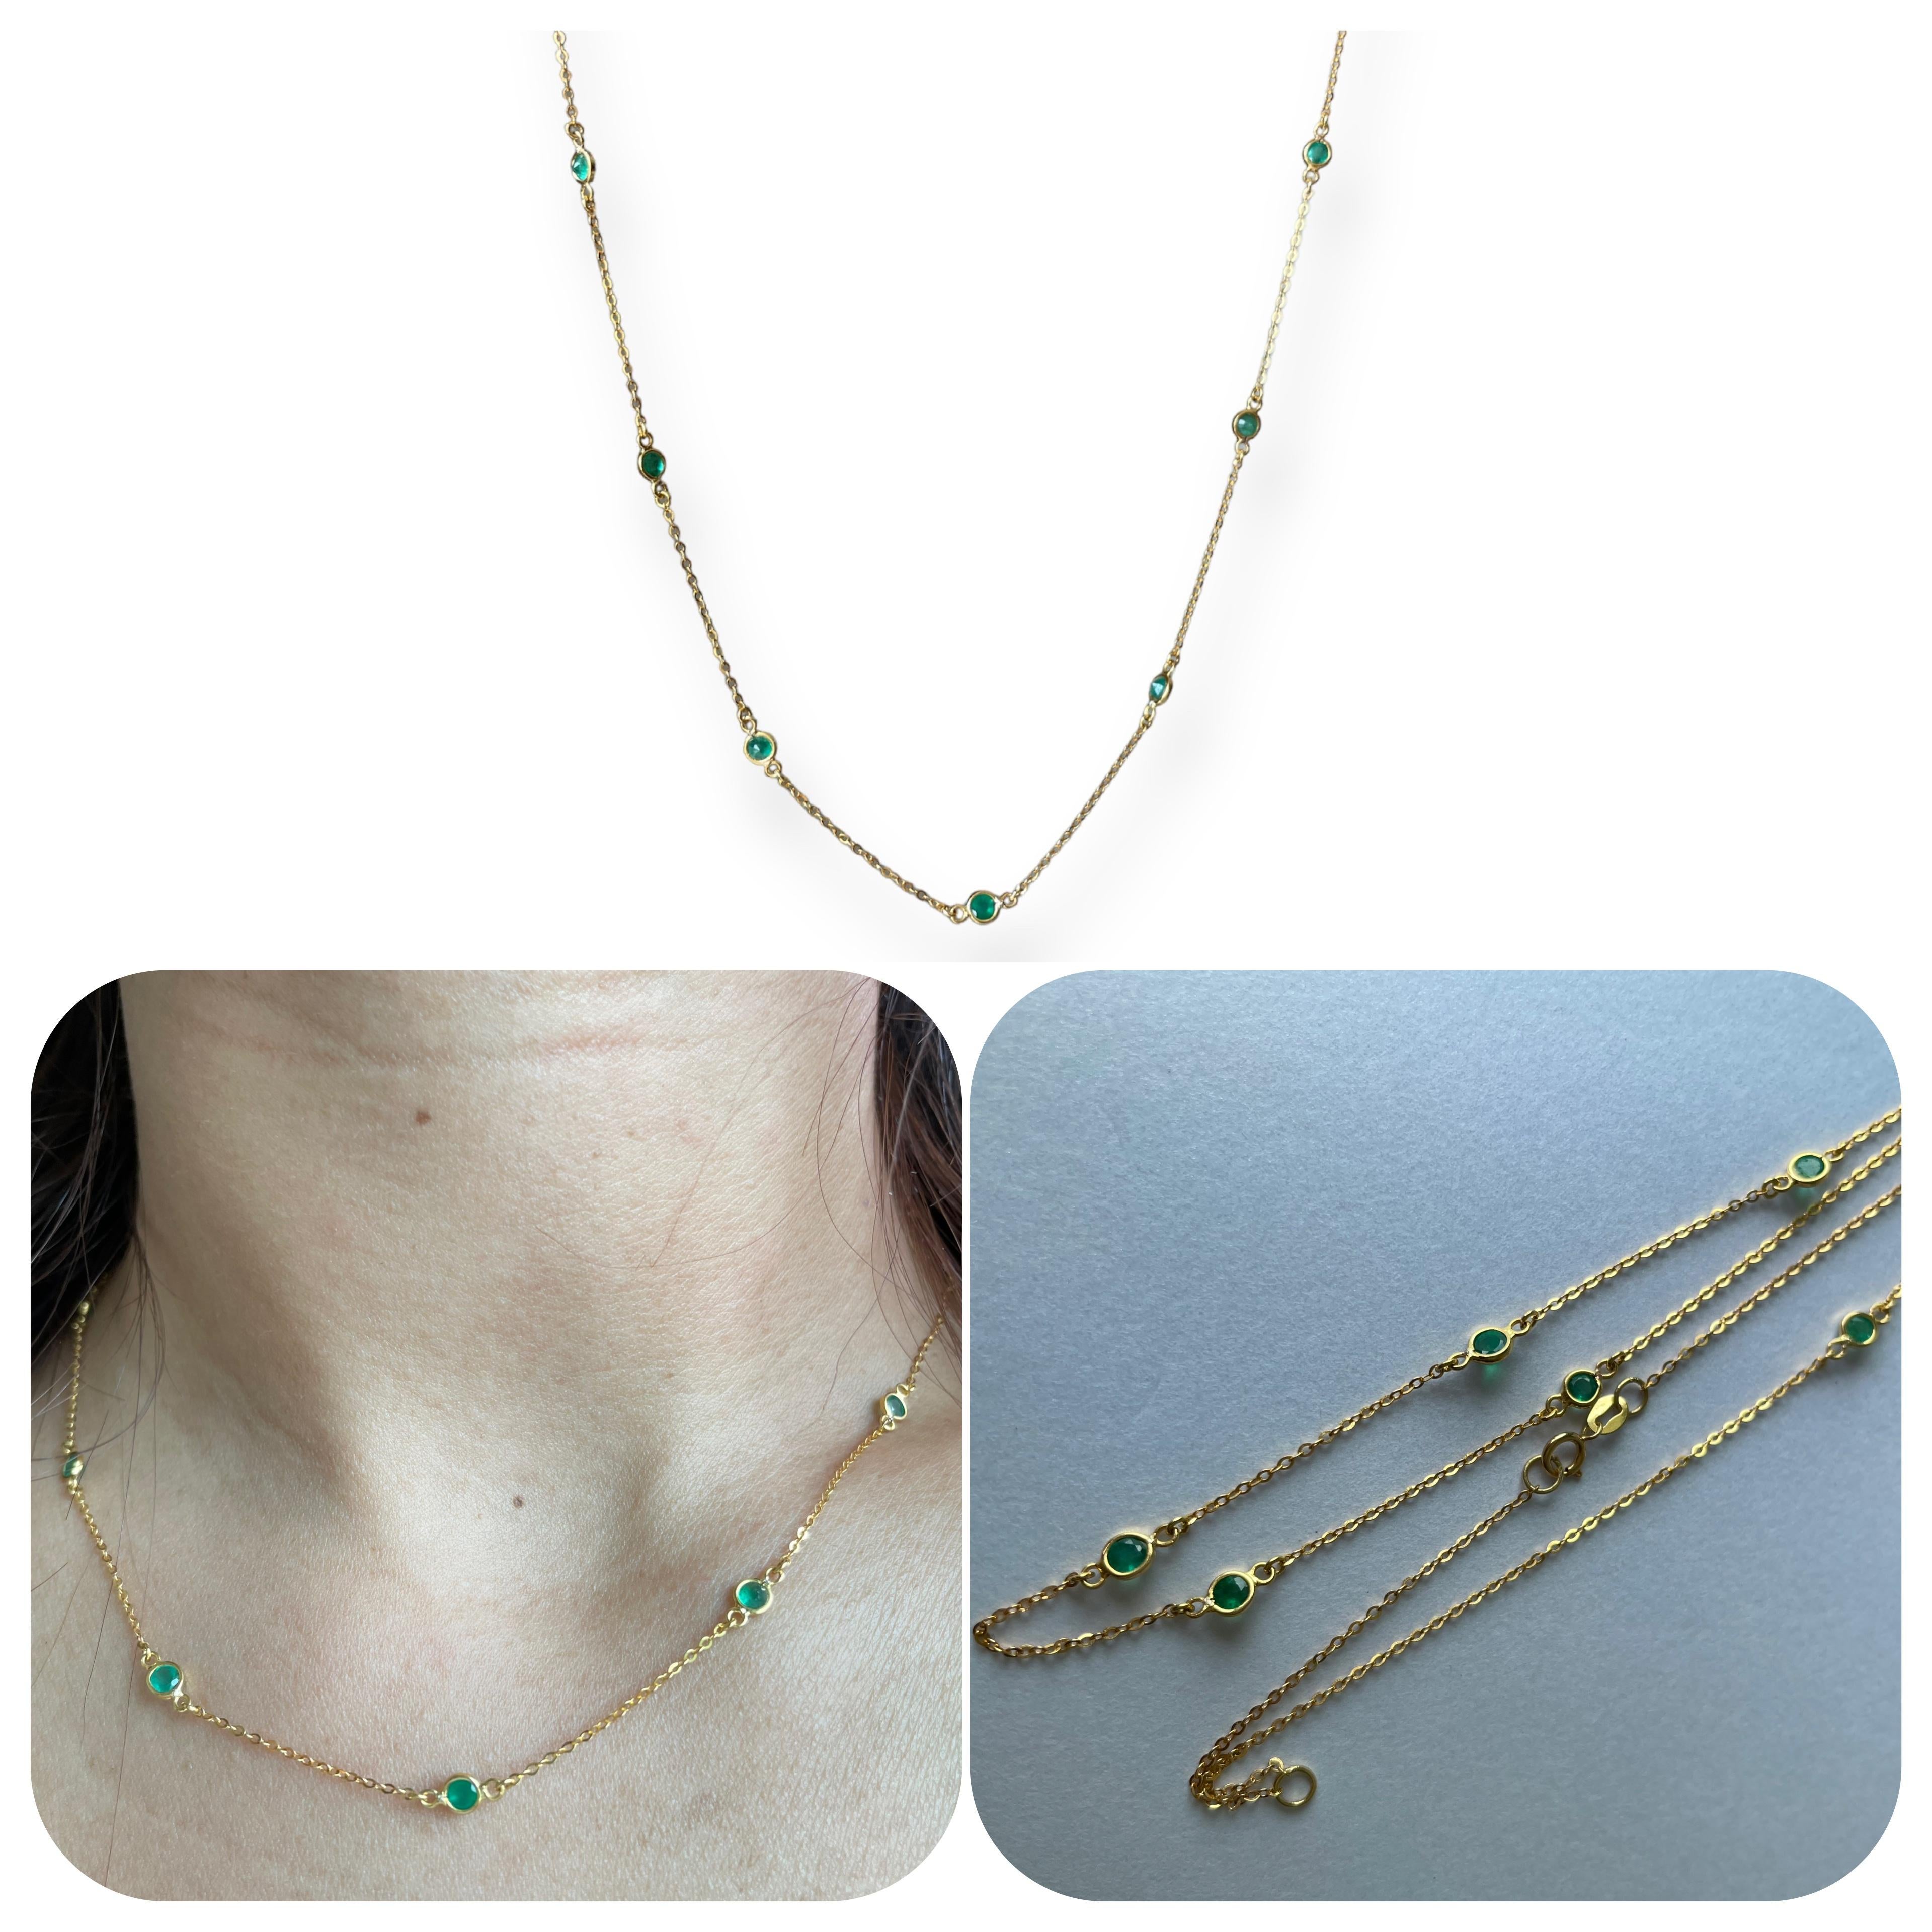 This simple minimalist design includes 7 natural emeralds that float around the neck on a dainty chain. Most importantly, every single stone is an earth-mined natural emerald. The length is flexible and can be adjusted to any length between 19